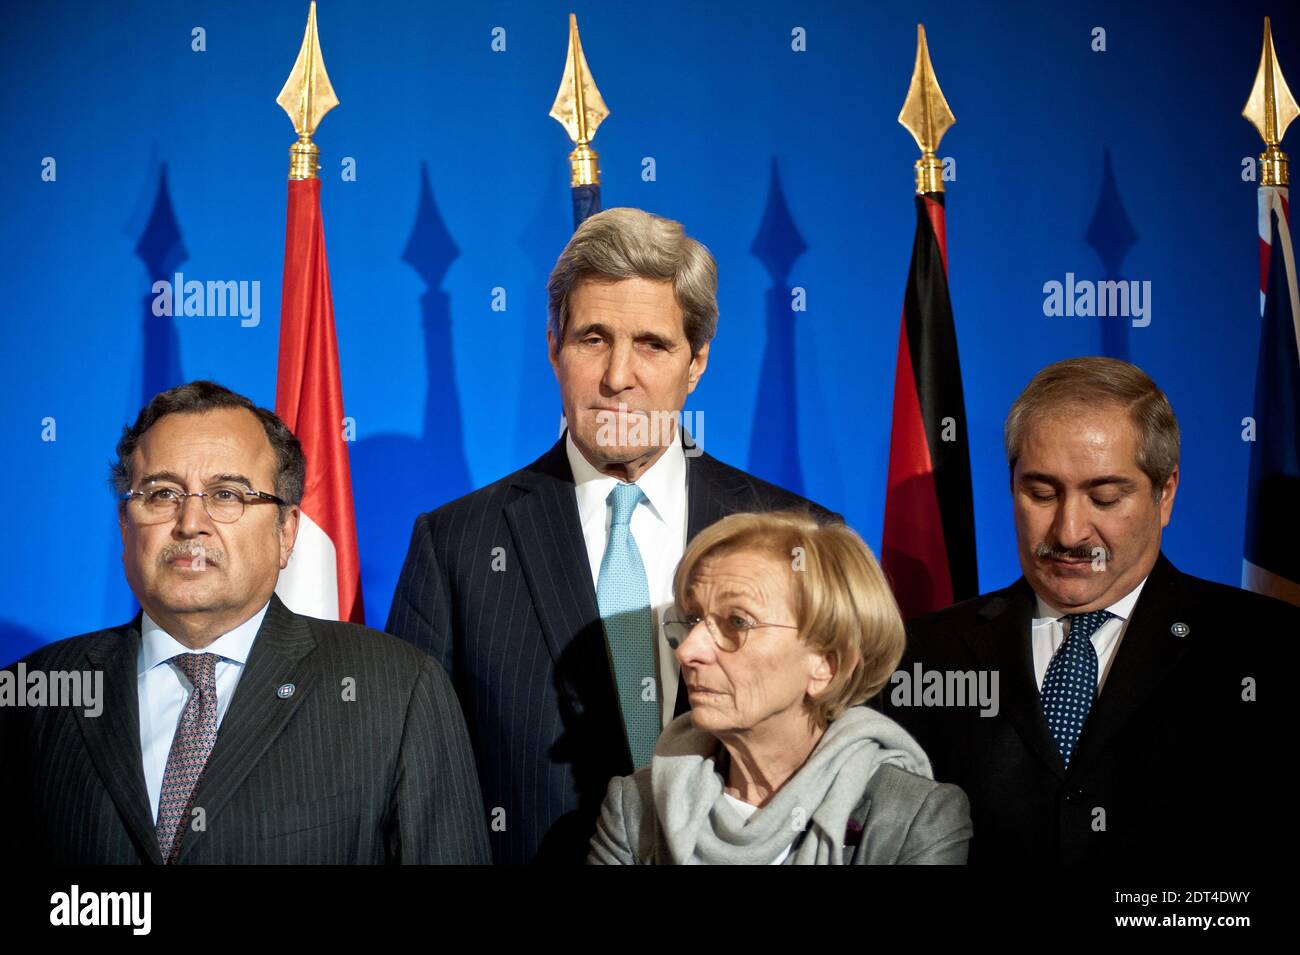 (L to R) Nabil Fahmy (Egypt), John Kerry (USA), Emma Bonino (Italy), Nasser Judeh (Jordan) pictured during a family photo at a press conference in Paris. The eleven countries of the Group of Friends of Syria met in Paris to convince the opposition to participate in Geneva-2. Laurent Fabius chaired the ministerial meeting, attended by the President of the Syrian Coalition, Ahmed Al-Jarba. Ministry of Foreign Affairs, in Paris, France, on January 12, 2014. Photo by Nicolas Messyasz/ABACAPRESS.COM Stock Photo